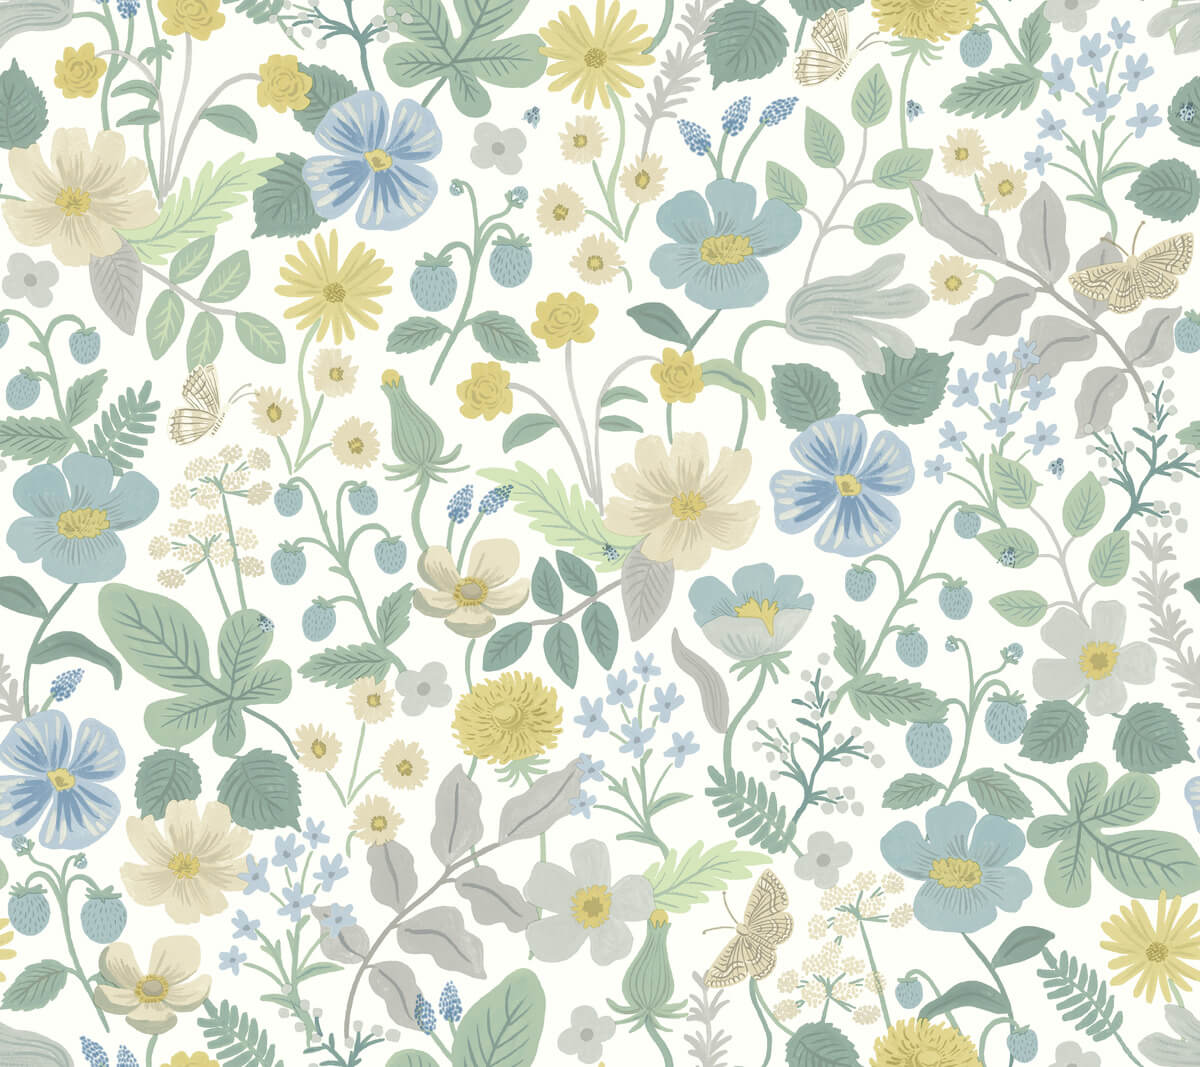 Rifle Paper Co. Second Edition Strawberry Fields Wallpaper - Yellow & Green